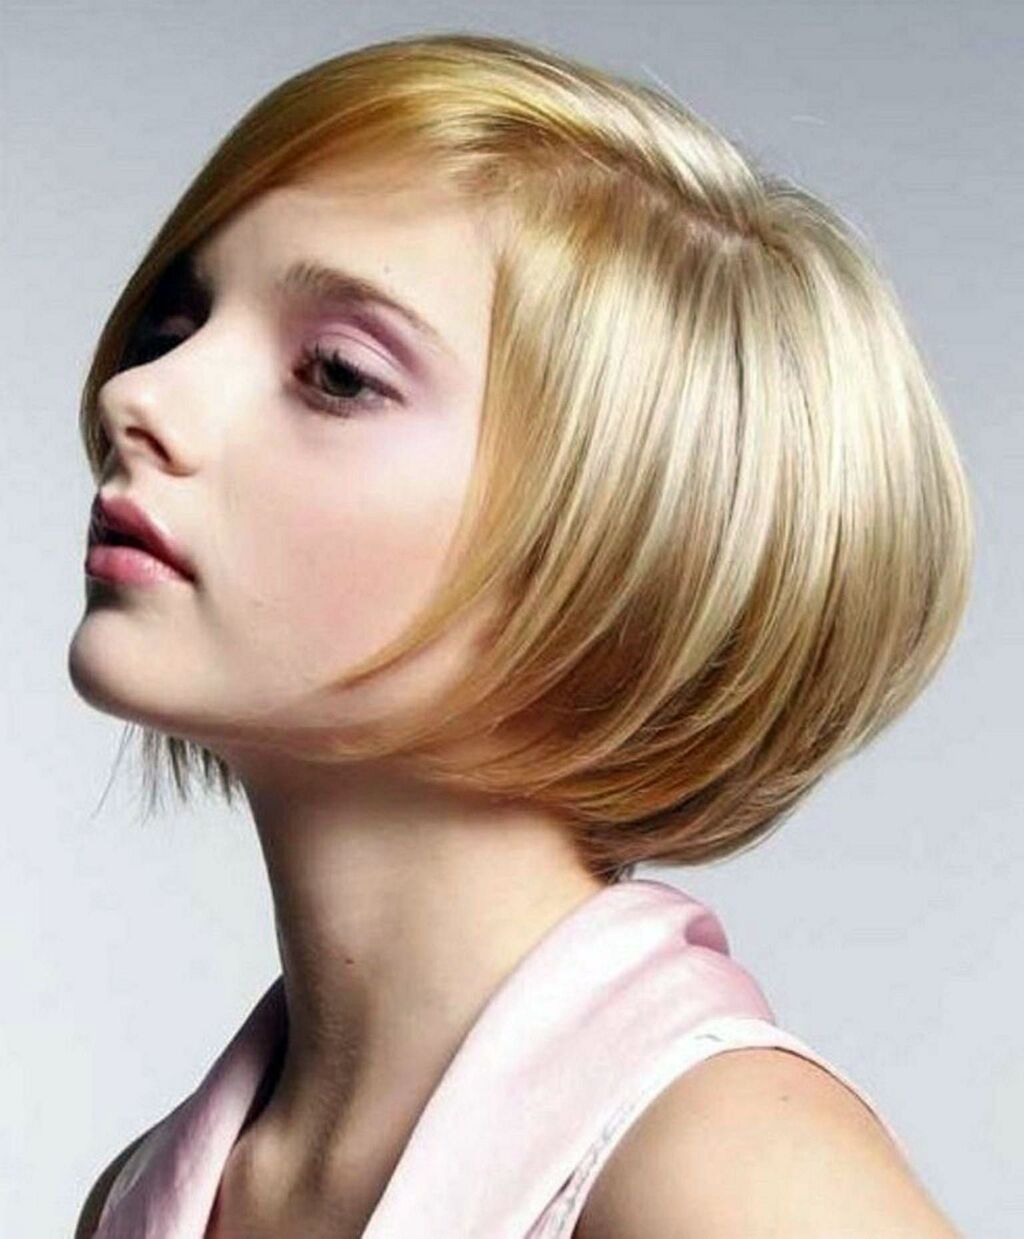 woman with blonde short stacked bob hairstyle